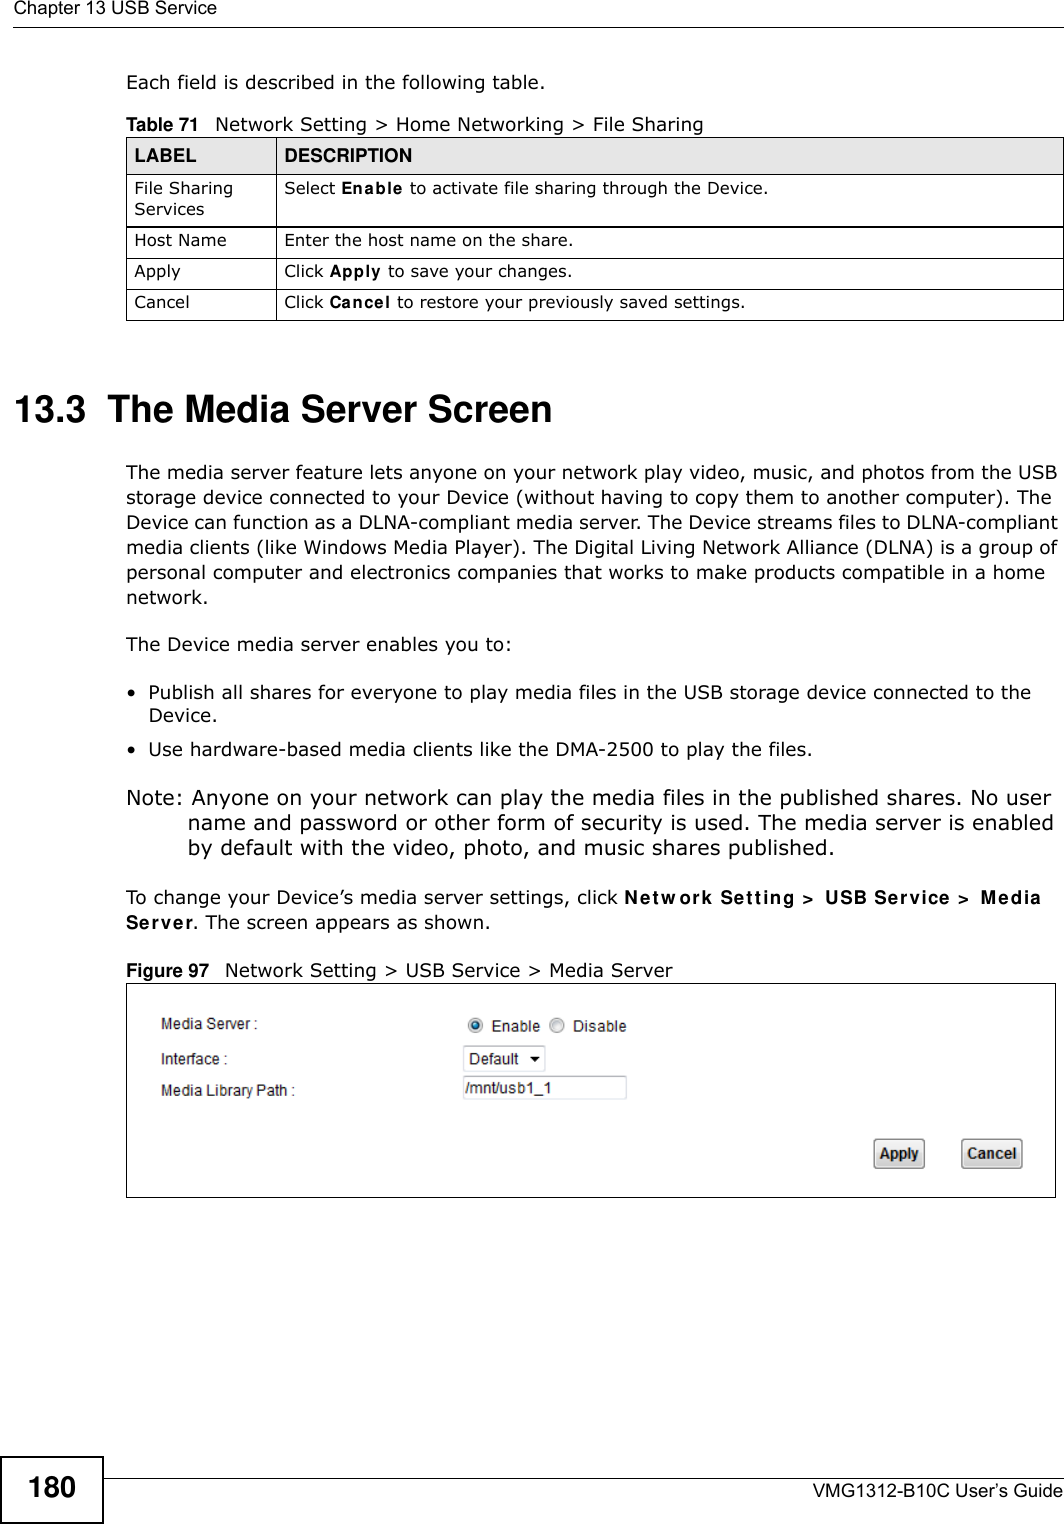 Chapter 13 USB ServiceVMG1312-B10C User’s Guide180Each field is described in the following table.13.3  The Media Server ScreenThe media server feature lets anyone on your network play video, music, and photos from the USB storage device connected to your Device (without having to copy them to another computer). The Device can function as a DLNA-compliant media server. The Device streams files to DLNA-compliant media clients (like Windows Media Player). The Digital Living Network Alliance (DLNA) is a group of personal computer and electronics companies that works to make products compatible in a home network.The Device media server enables you to:• Publish all shares for everyone to play media files in the USB storage device connected to the Device.• Use hardware-based media clients like the DMA-2500 to play the files. Note: Anyone on your network can play the media files in the published shares. No user name and password or other form of security is used. The media server is enabled by default with the video, photo, and music shares published. To change your Device’s media server settings, click Net w or k  Set t ing &gt;  USB Ser vice &gt;  Me dia  Serve r. The screen appears as shown.Figure 97   Network Setting &gt; USB Service &gt; Media ServerTable 71   Network Setting &gt; Home Networking &gt; File SharingLABEL DESCRIPTIONFile Sharing ServicesSelect Enable  to activate file sharing through the Device. Host Name Enter the host name on the share.Apply Click Apply to save your changes.Cancel Click Cance l to restore your previously saved settings.